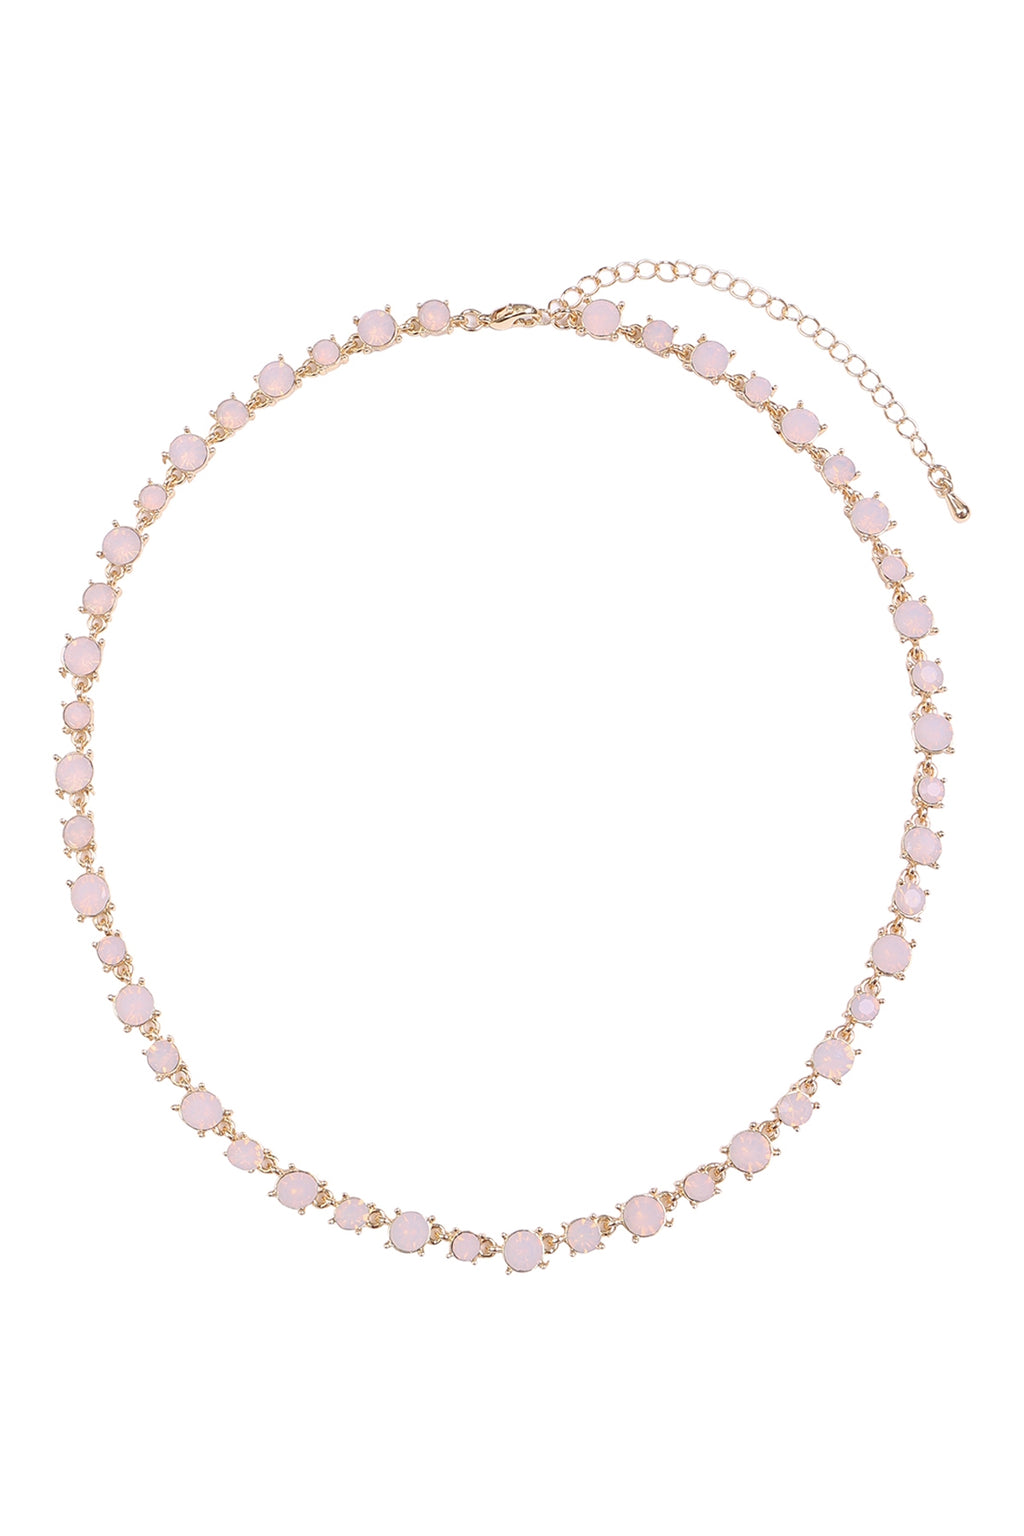 Bold Round Rhinestone Crystal Necklace Pink - Pack of 6